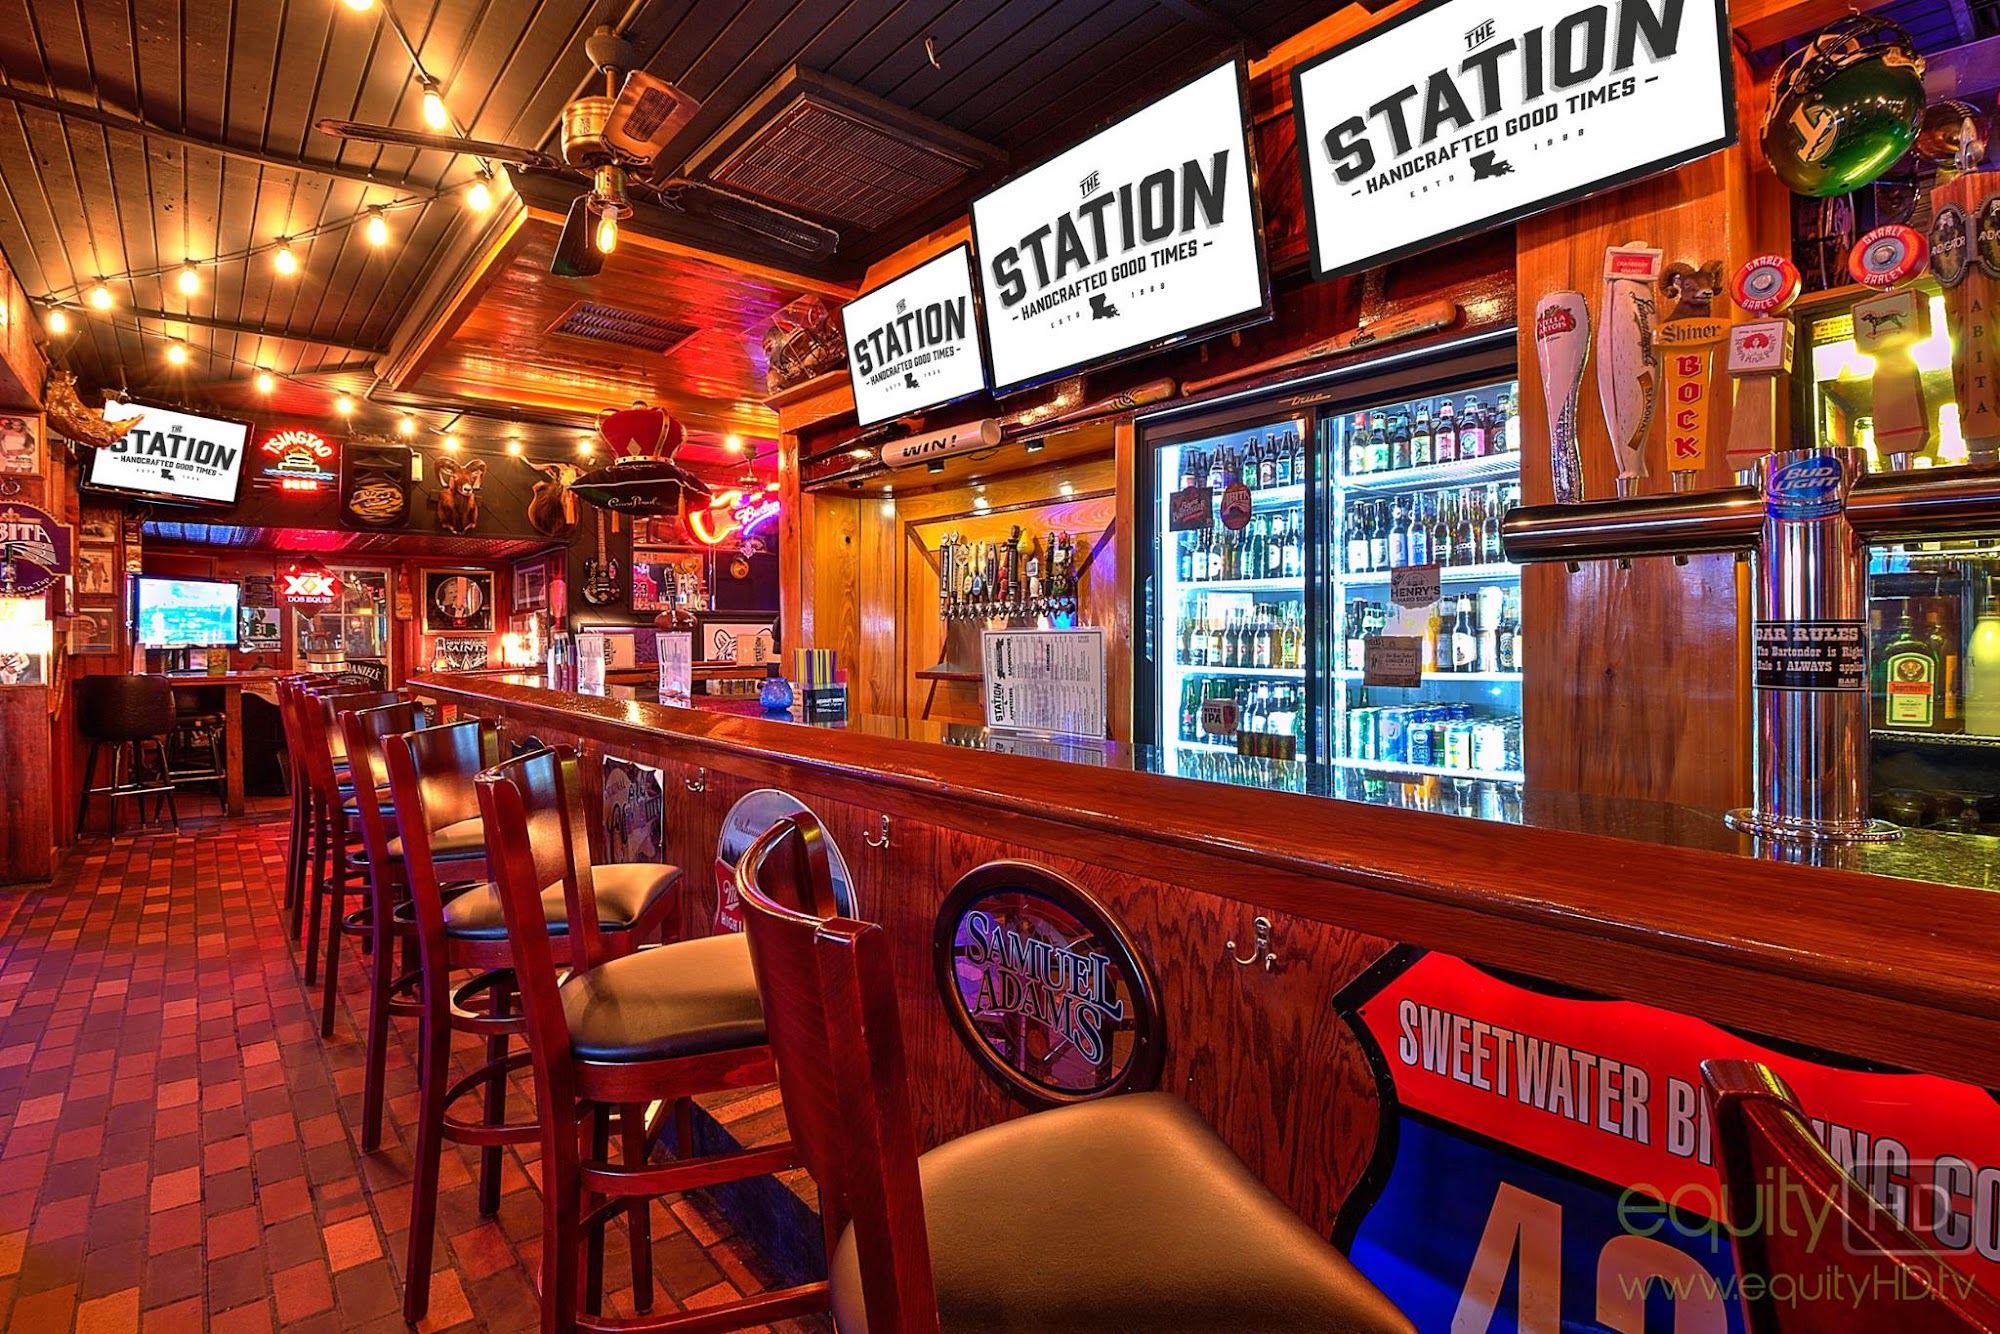 The Station Sports Bar and Grill